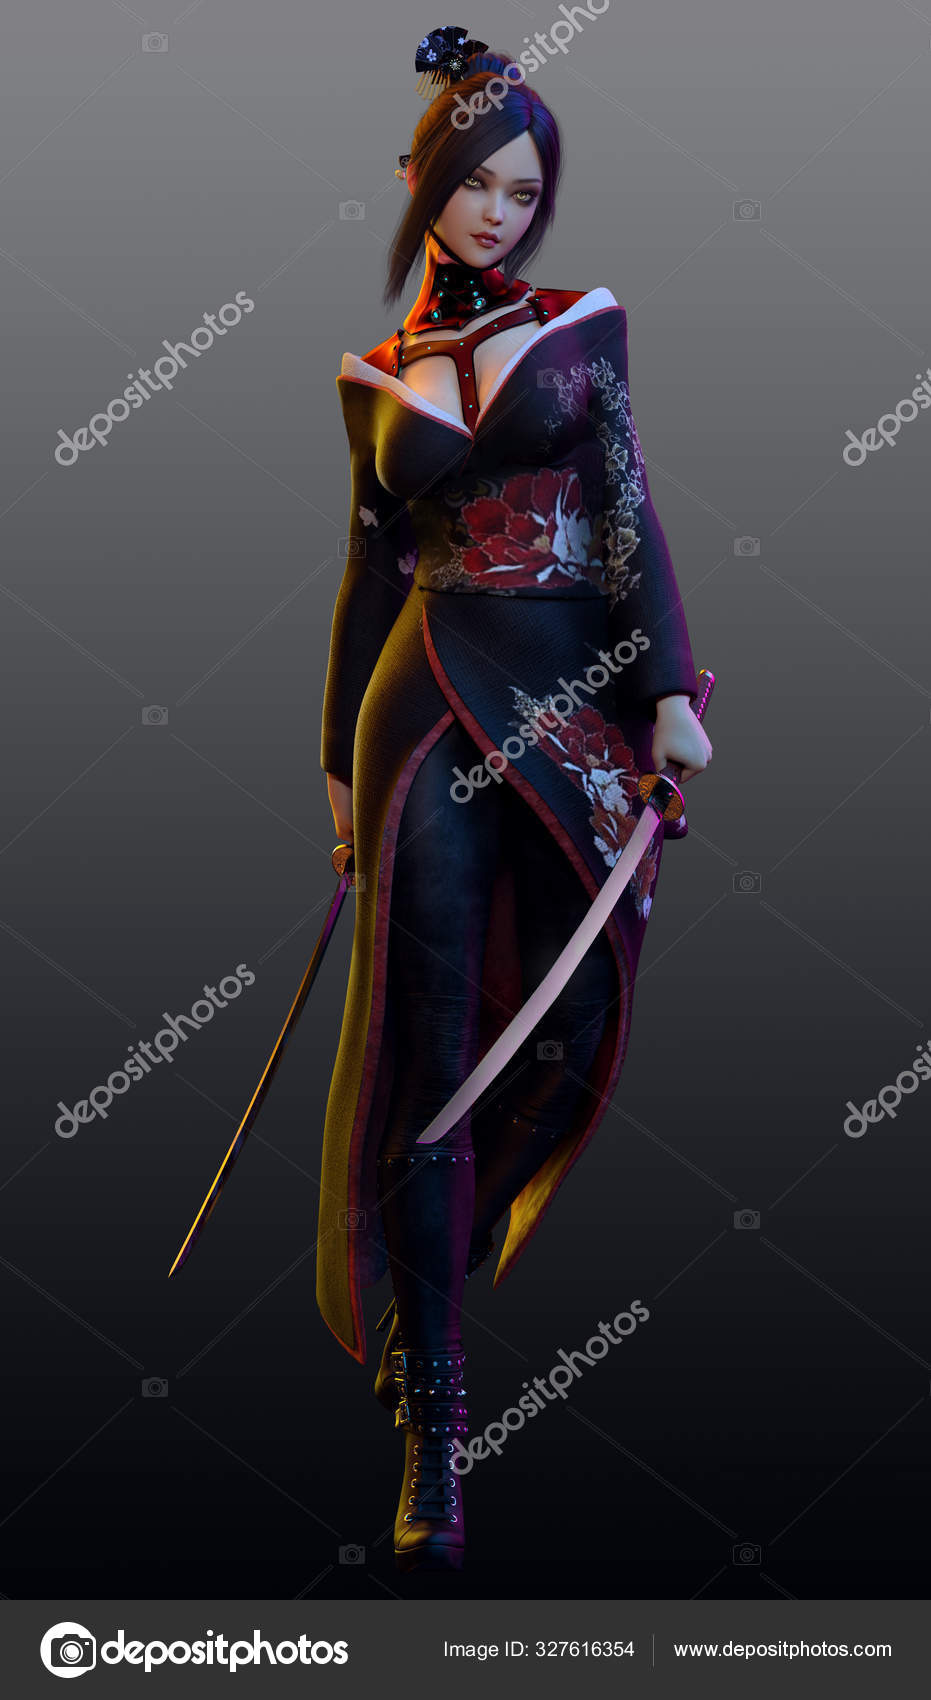 Details more than 137 anime samurai outfit latest